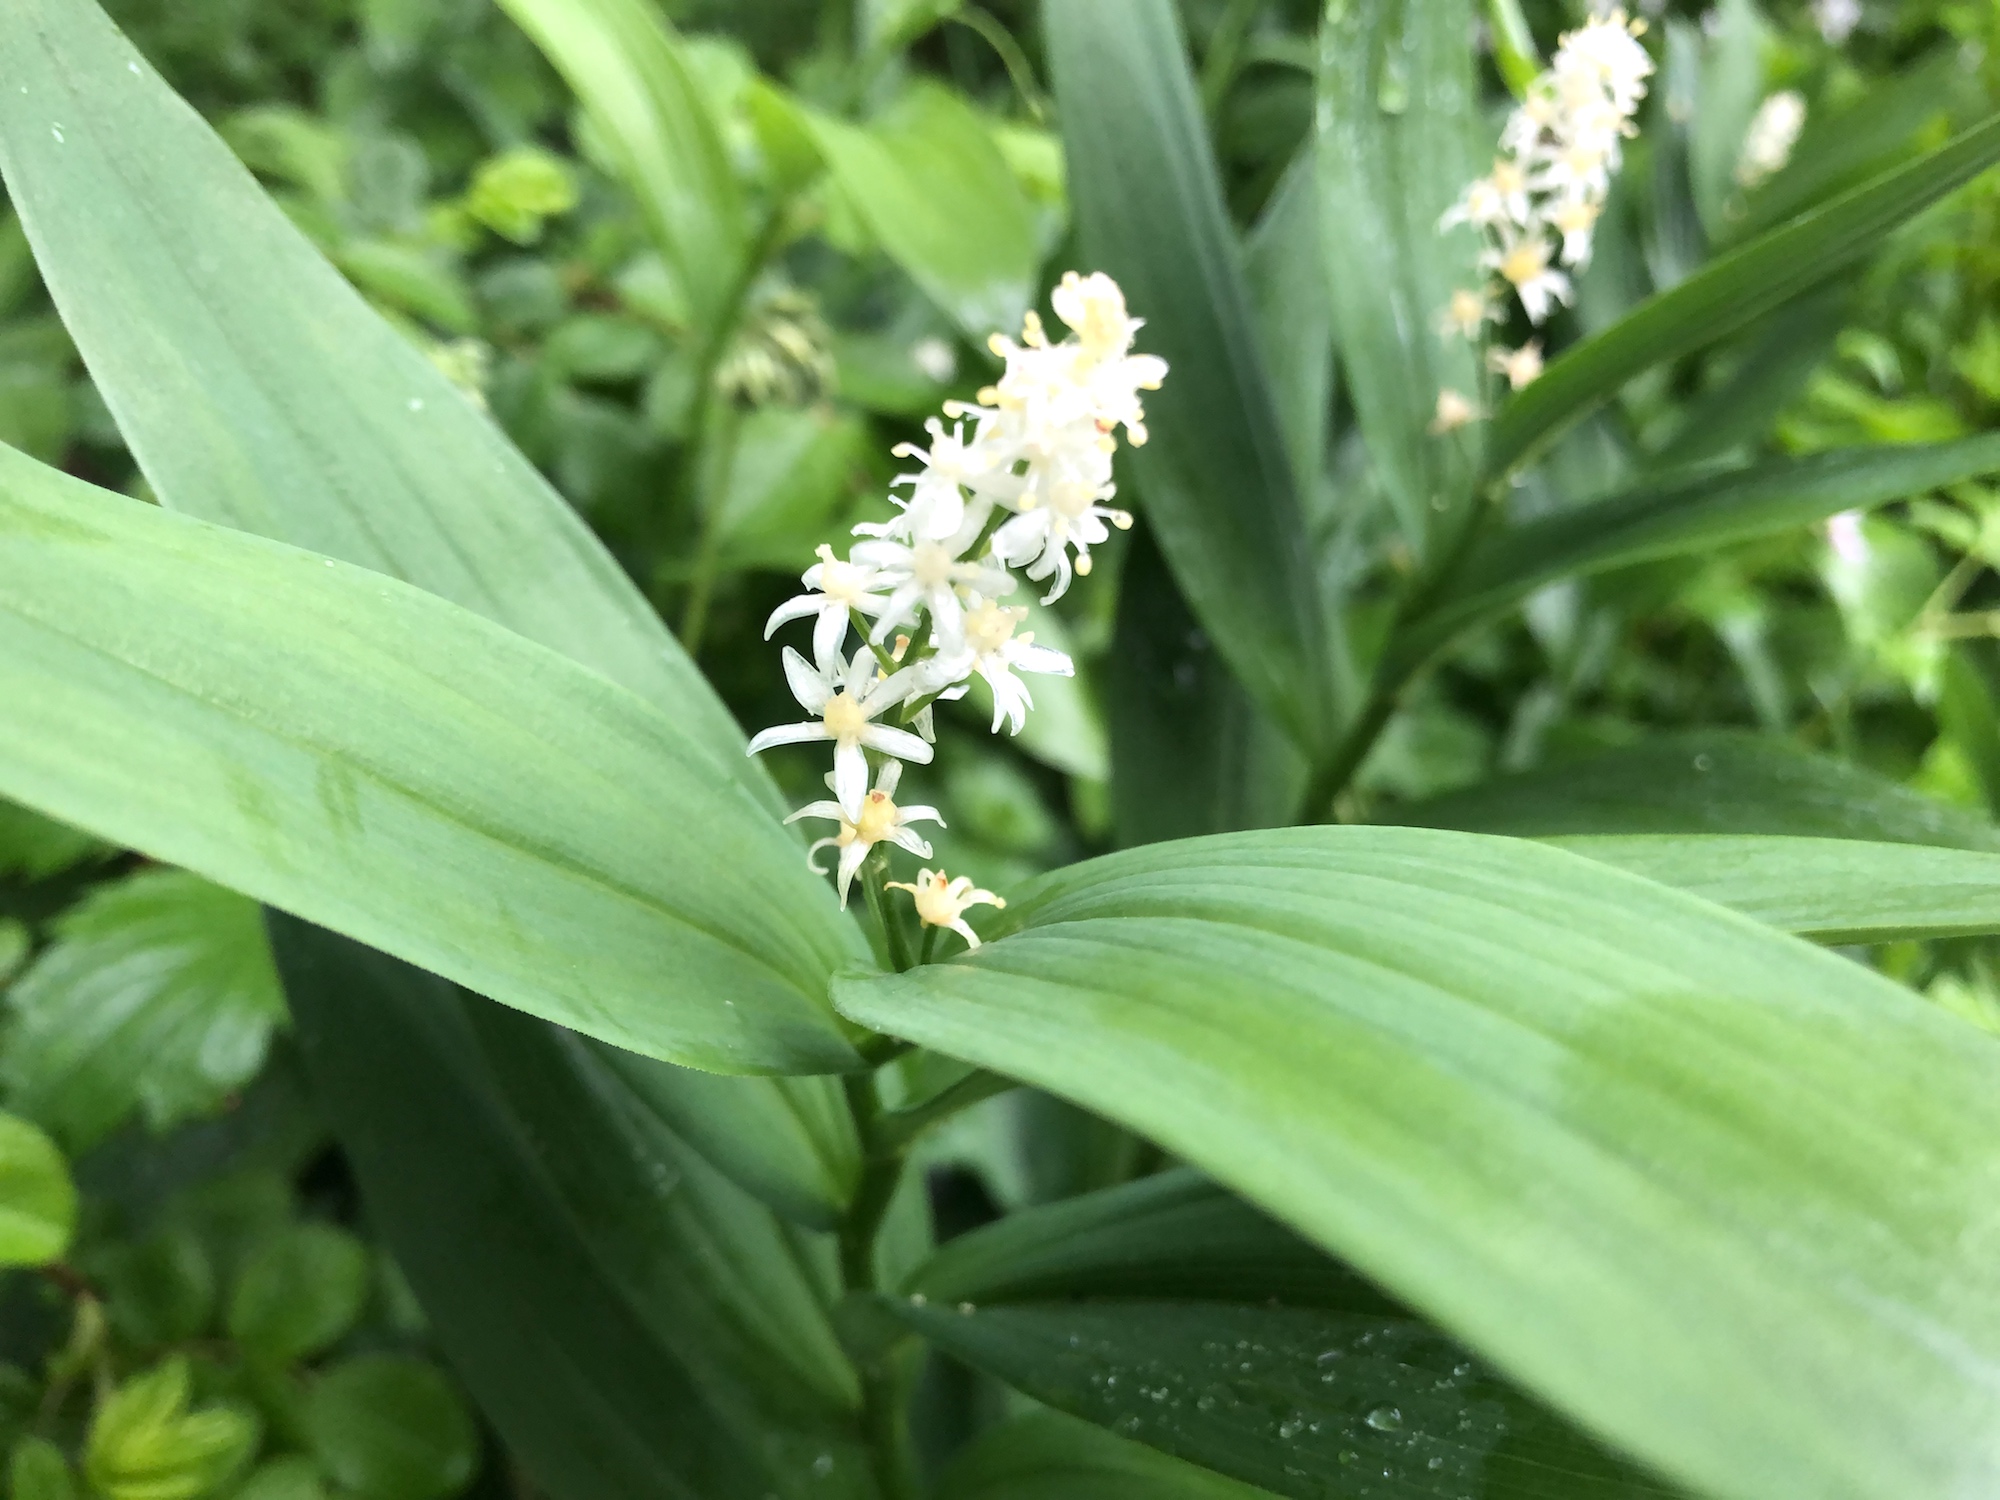 Starry False Solomon's Seal near Duck Pond in Madison, Wisconsin on May 25, 2019.